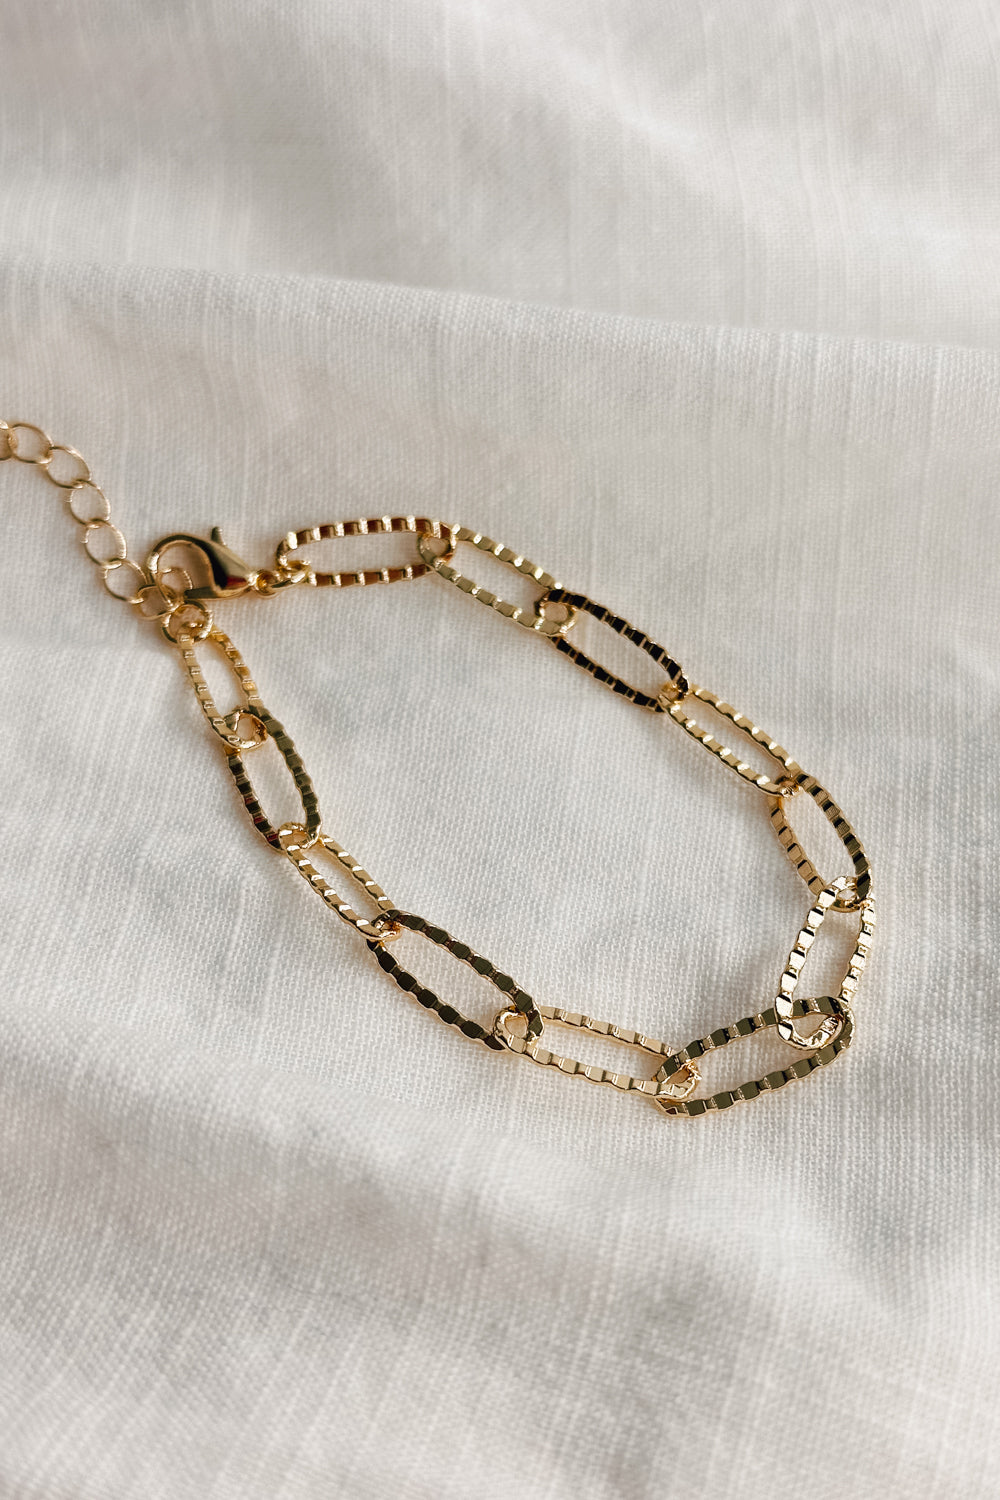 Image shows the Bethany Gold Textured Chain Link Bracelet against a white background. Bracelet has gold textured oval links.